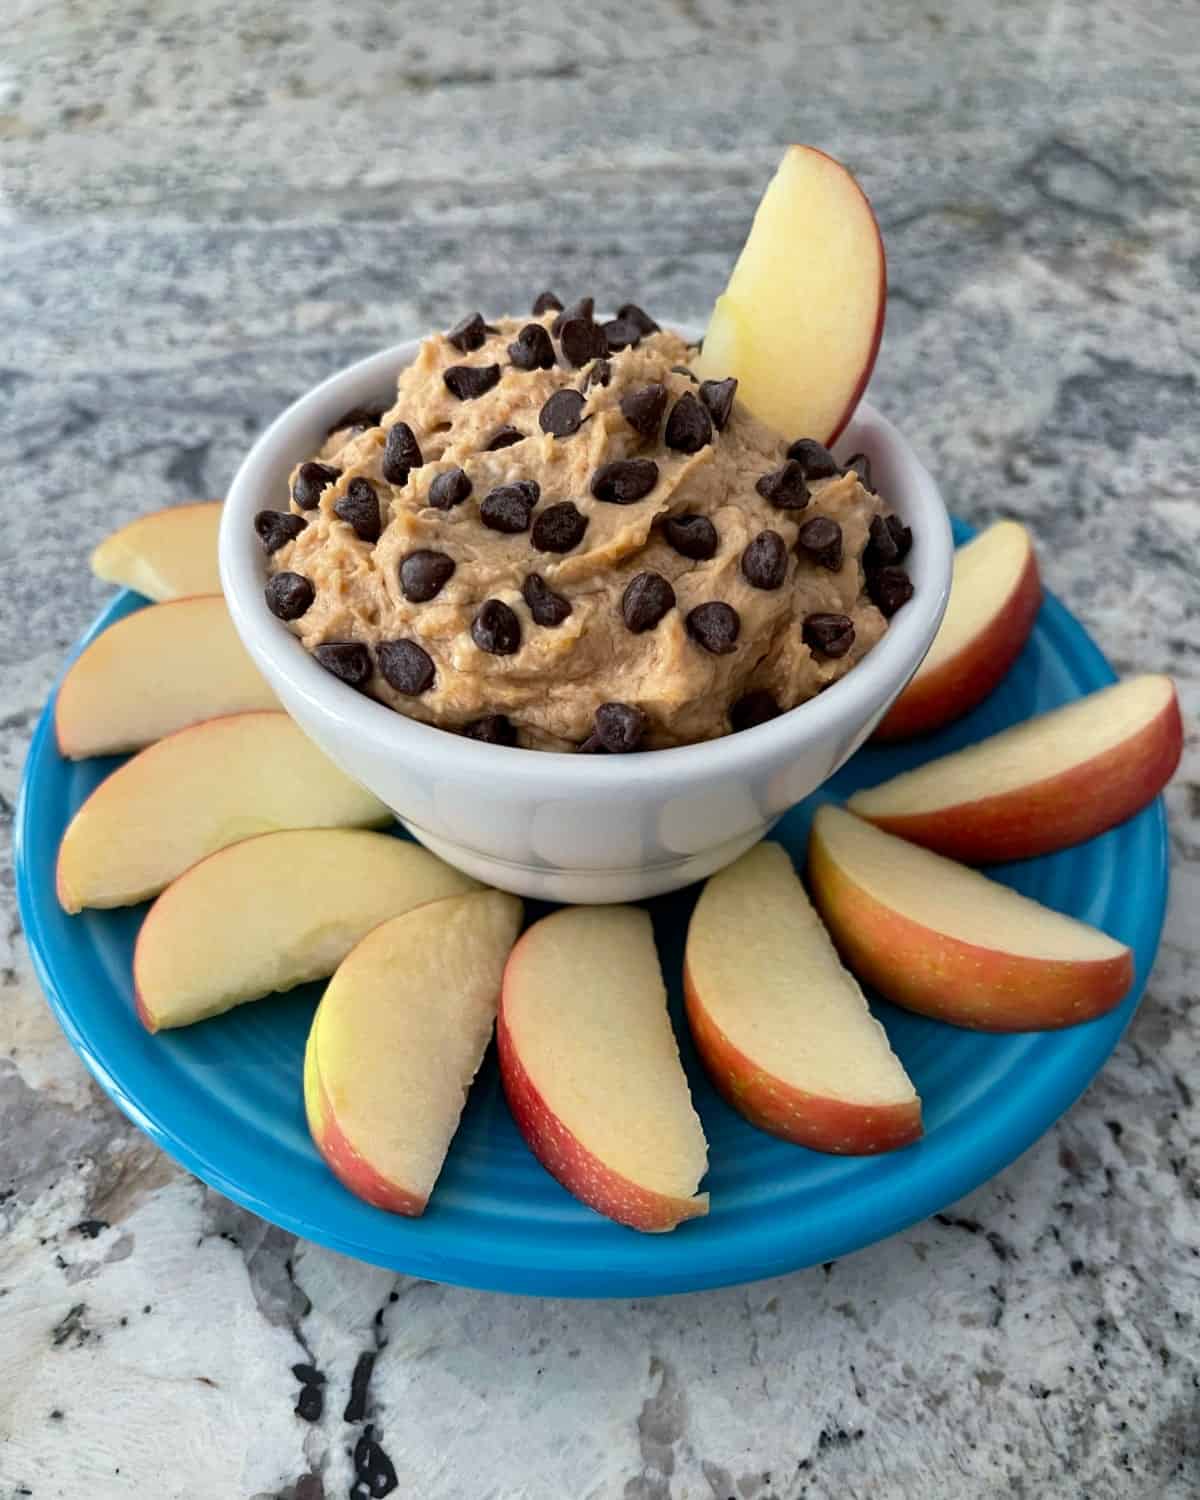 Peanut butter cup dip with fresh apple slices.